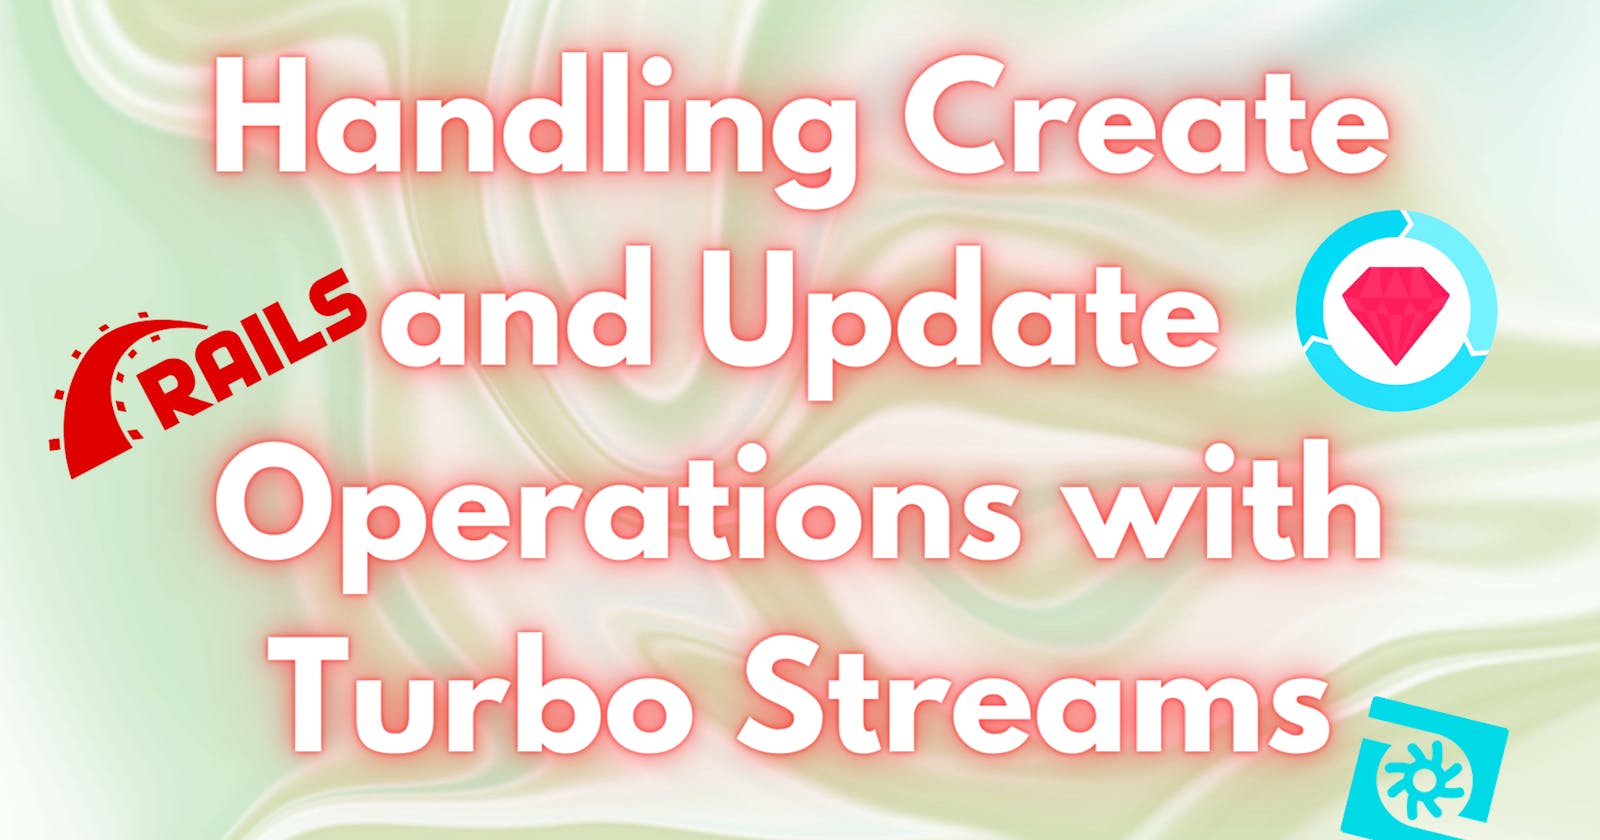 Handling Create and Update Operations with Turbo Streams in Rails 7 (rspec tests included)